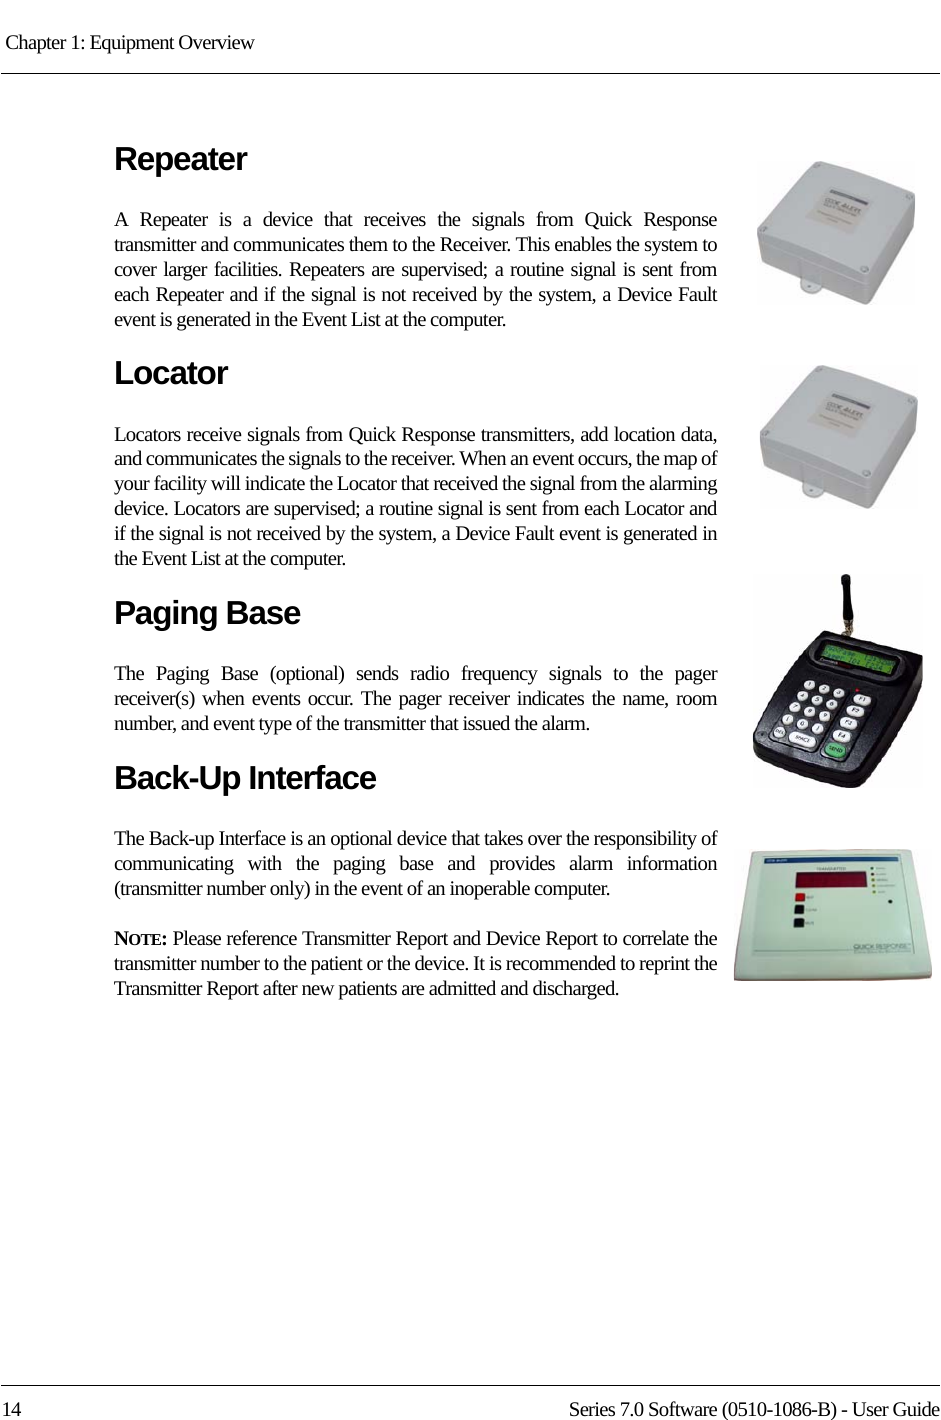 Chapter 1: Equipment Overview 14 Series 7.0 Software (0510-1086-B) - User GuideRepeaterA Repeater is a device that receives the signals from Quick Response transmitter and communicates them to the Receiver. This enables the system to cover larger facilities. Repeaters are supervised; a routine signal is sent from each Repeater and if the signal is not received by the system, a Device Fault event is generated in the Event List at the computer.LocatorLocators receive signals from Quick Response transmitters, add location data, and communicates the signals to the receiver. When an event occurs, the map of your facility will indicate the Locator that received the signal from the alarming device. Locators are supervised; a routine signal is sent from each Locator and if the signal is not received by the system, a Device Fault event is generated in the Event List at the computer.Paging BaseThe Paging Base (optional) sends radio frequency signals to the pager receiver(s) when events occur. The pager receiver indicates the name, room number, and event type of the transmitter that issued the alarm.Back-Up InterfaceThe Back-up Interface is an optional device that takes over the responsibility of communicating with the paging base and provides alarm information (transmitter number only) in the event of an inoperable computer.NOTE: Please reference Transmitter Report and Device Report to correlate the transmitter number to the patient or the device. It is recommended to reprint the Transmitter Report after new patients are admitted and discharged.